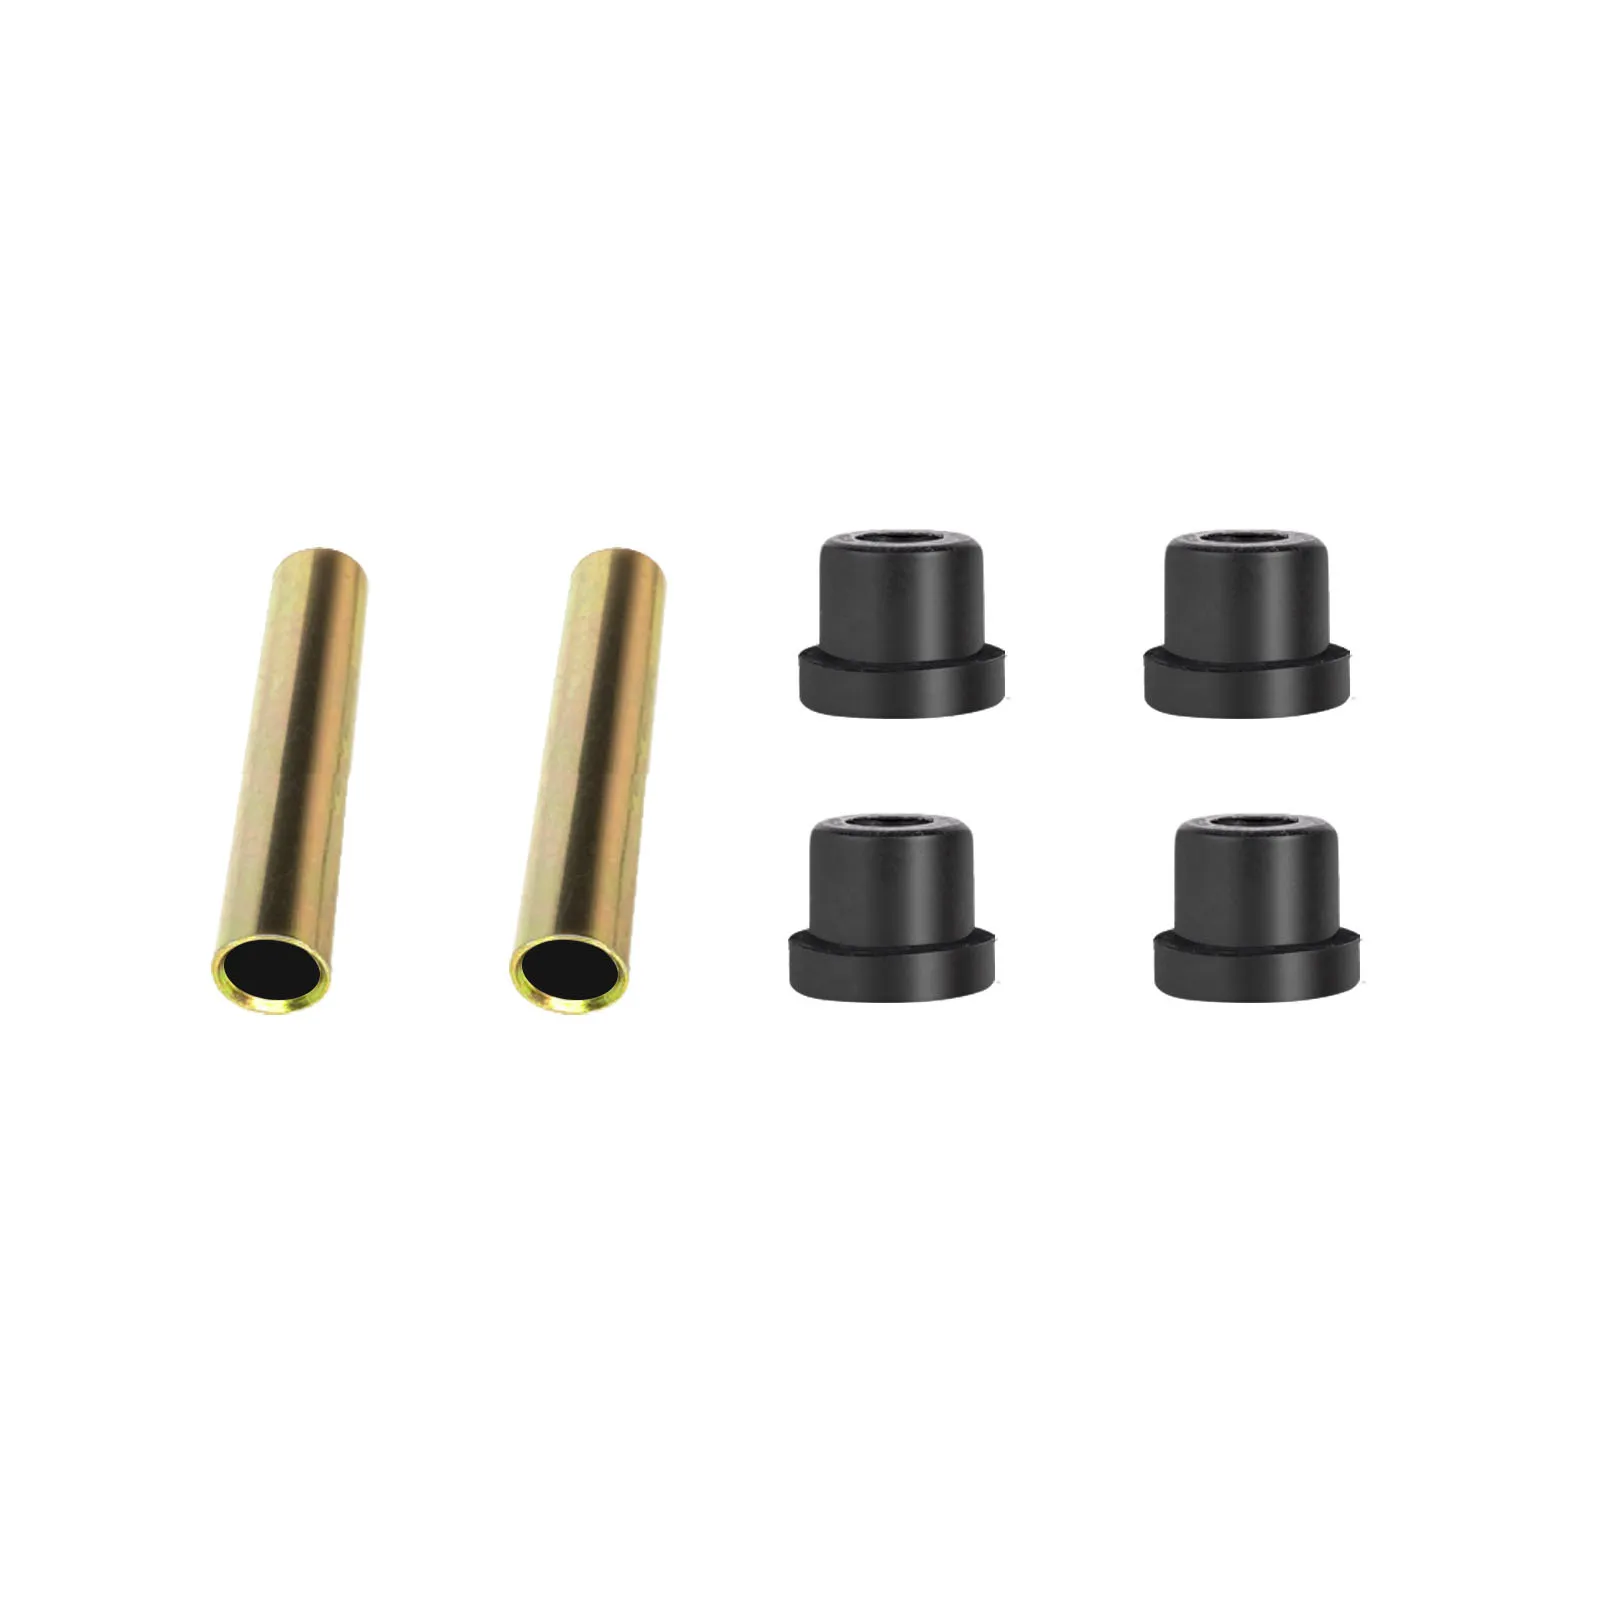 

4Pcs Plastic Bushings 1012303 & 2Pcs Metal Sleeves 105583 Kit for Club Car DS 1981-Up Gas Electric Golf Carts Front Leaf Spring